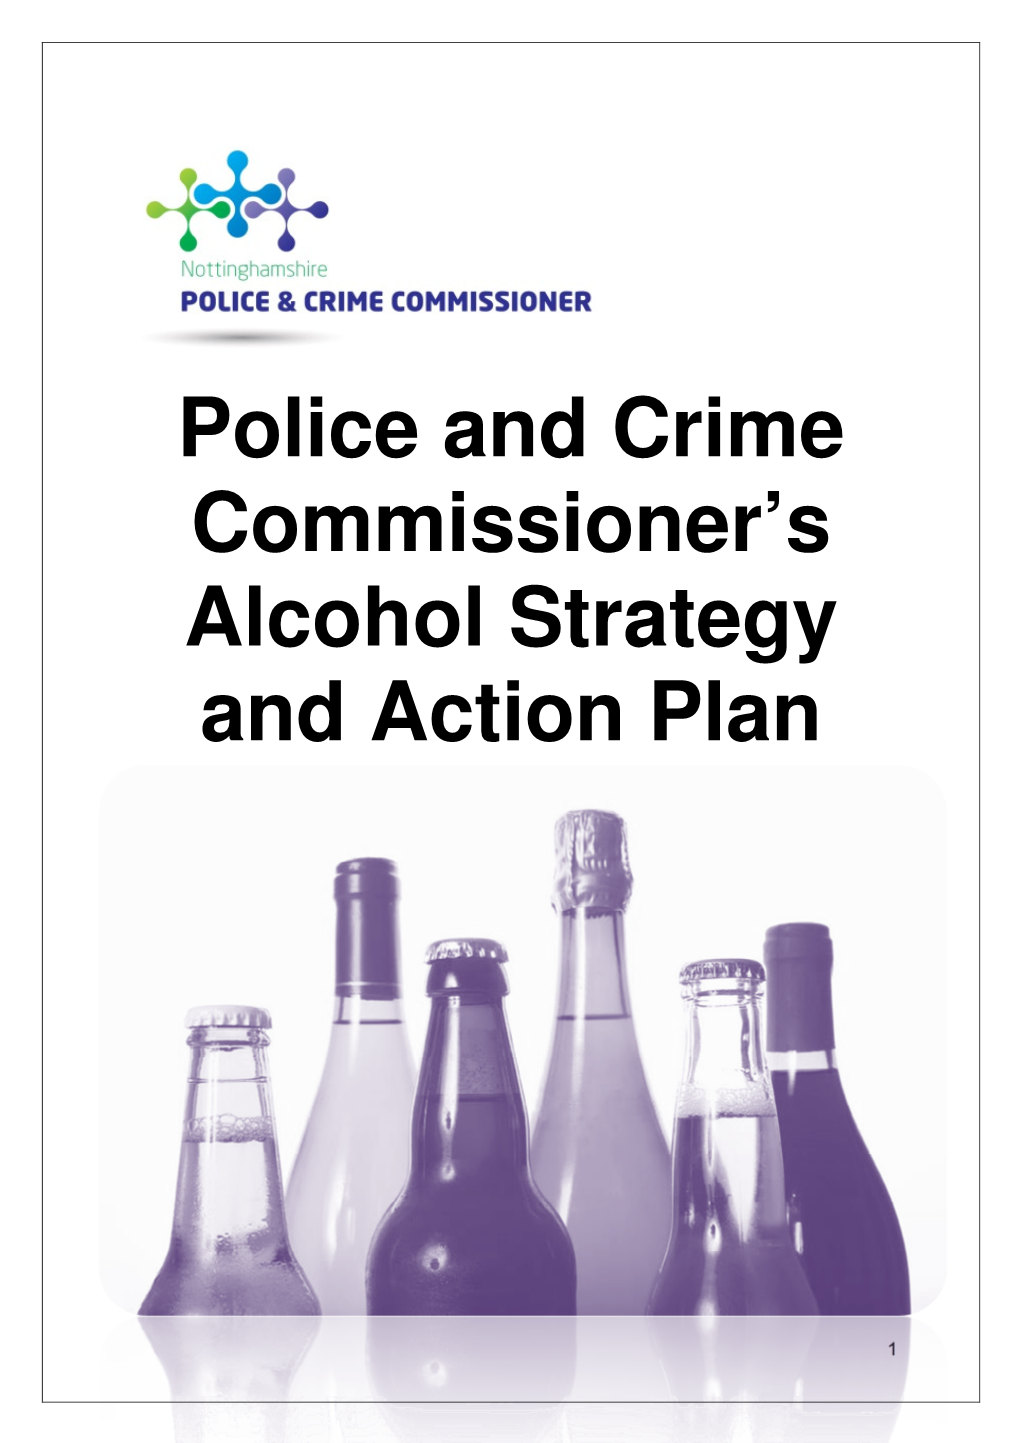 Alcohol Strategy and Action Plan